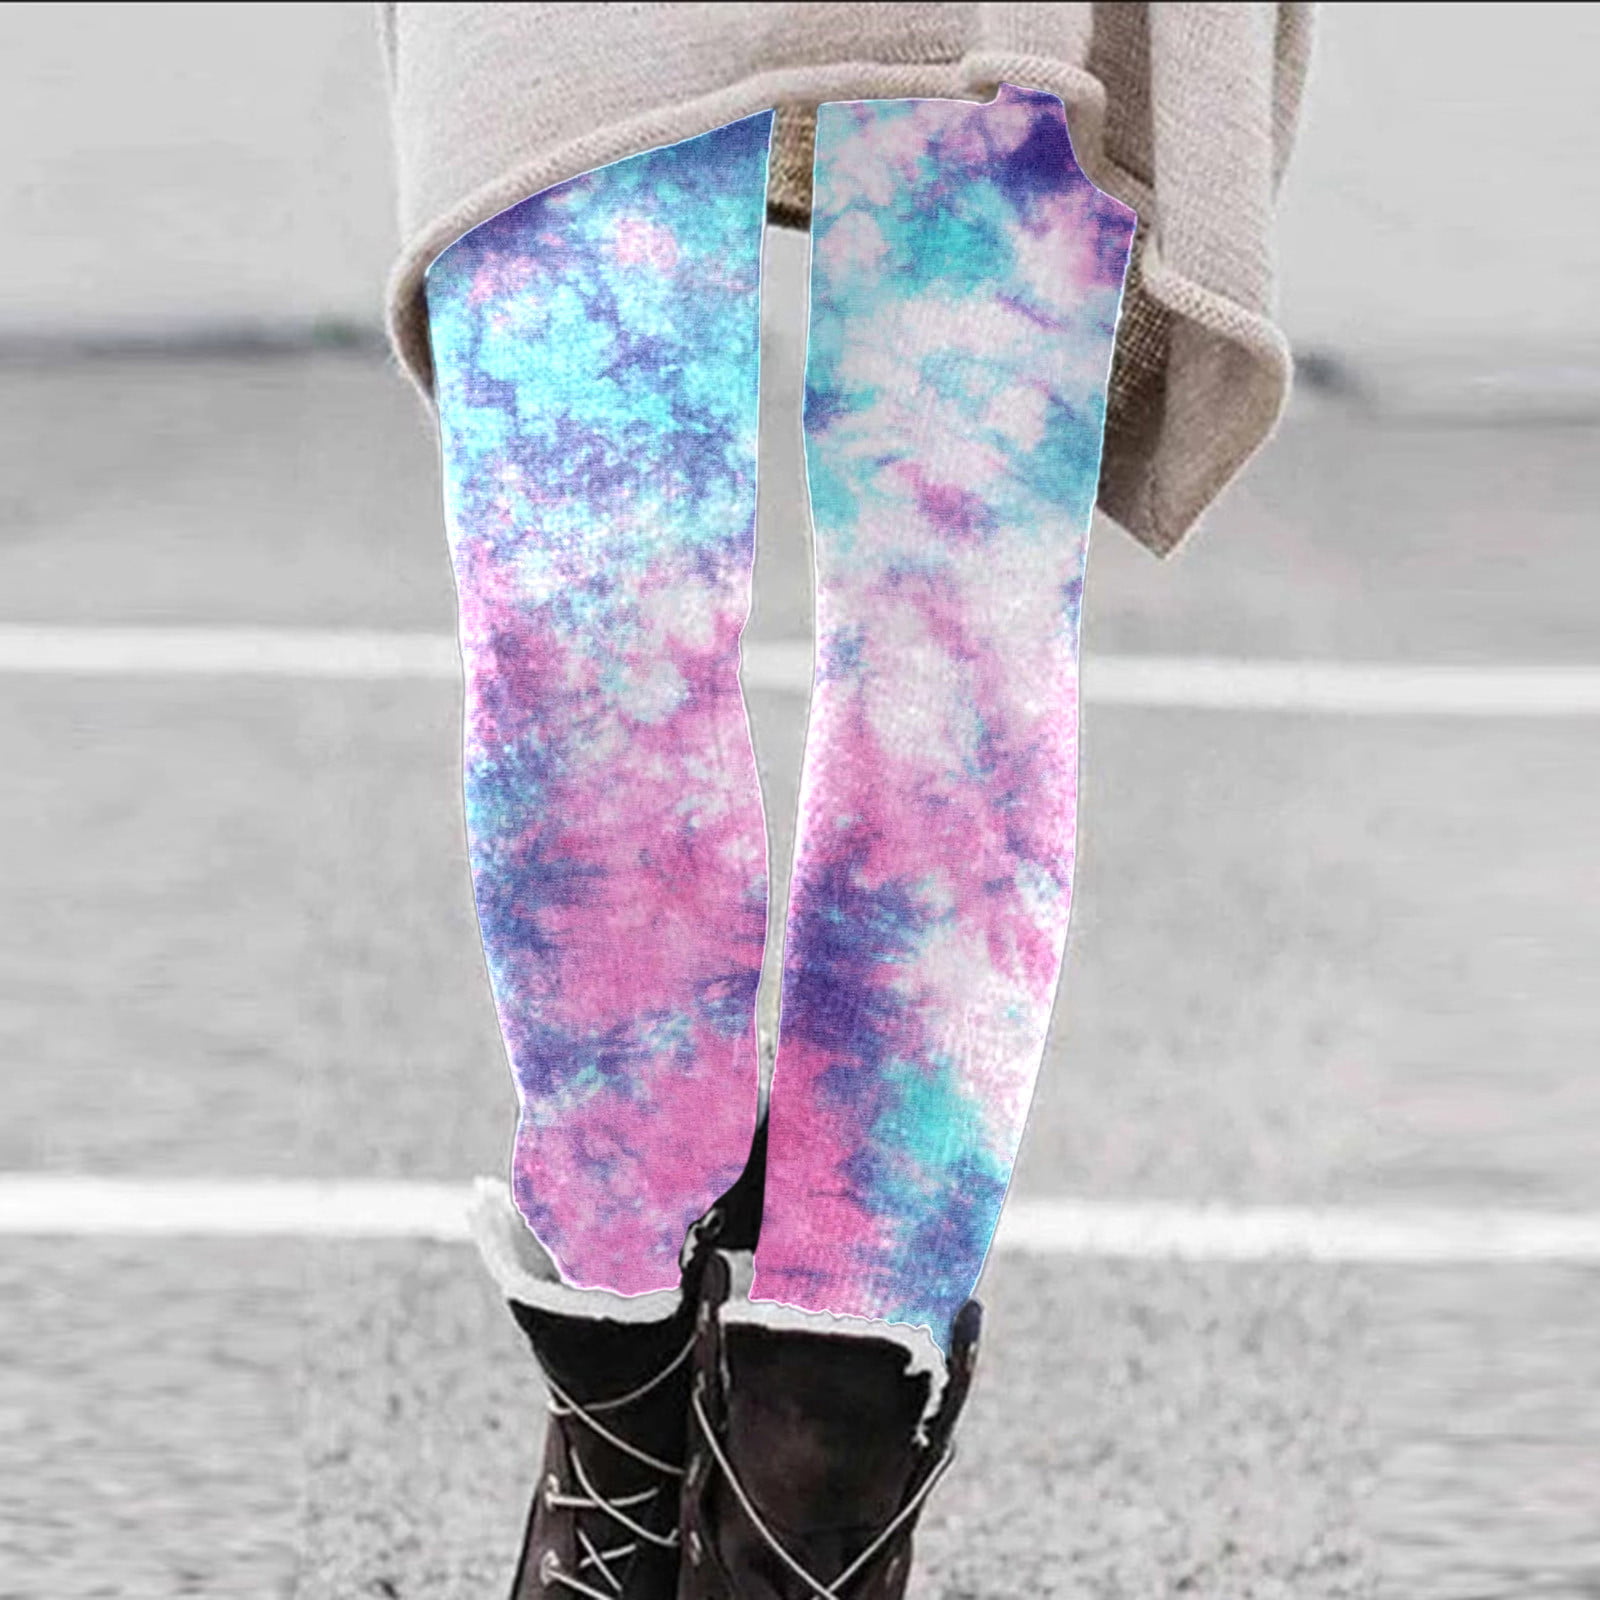 JDEFEG Soft Leggings For Women Women Autumn And Winter Colorful Tie Dye  Waist Leggings Business Casual Pants For Women Plus Polyester O M 